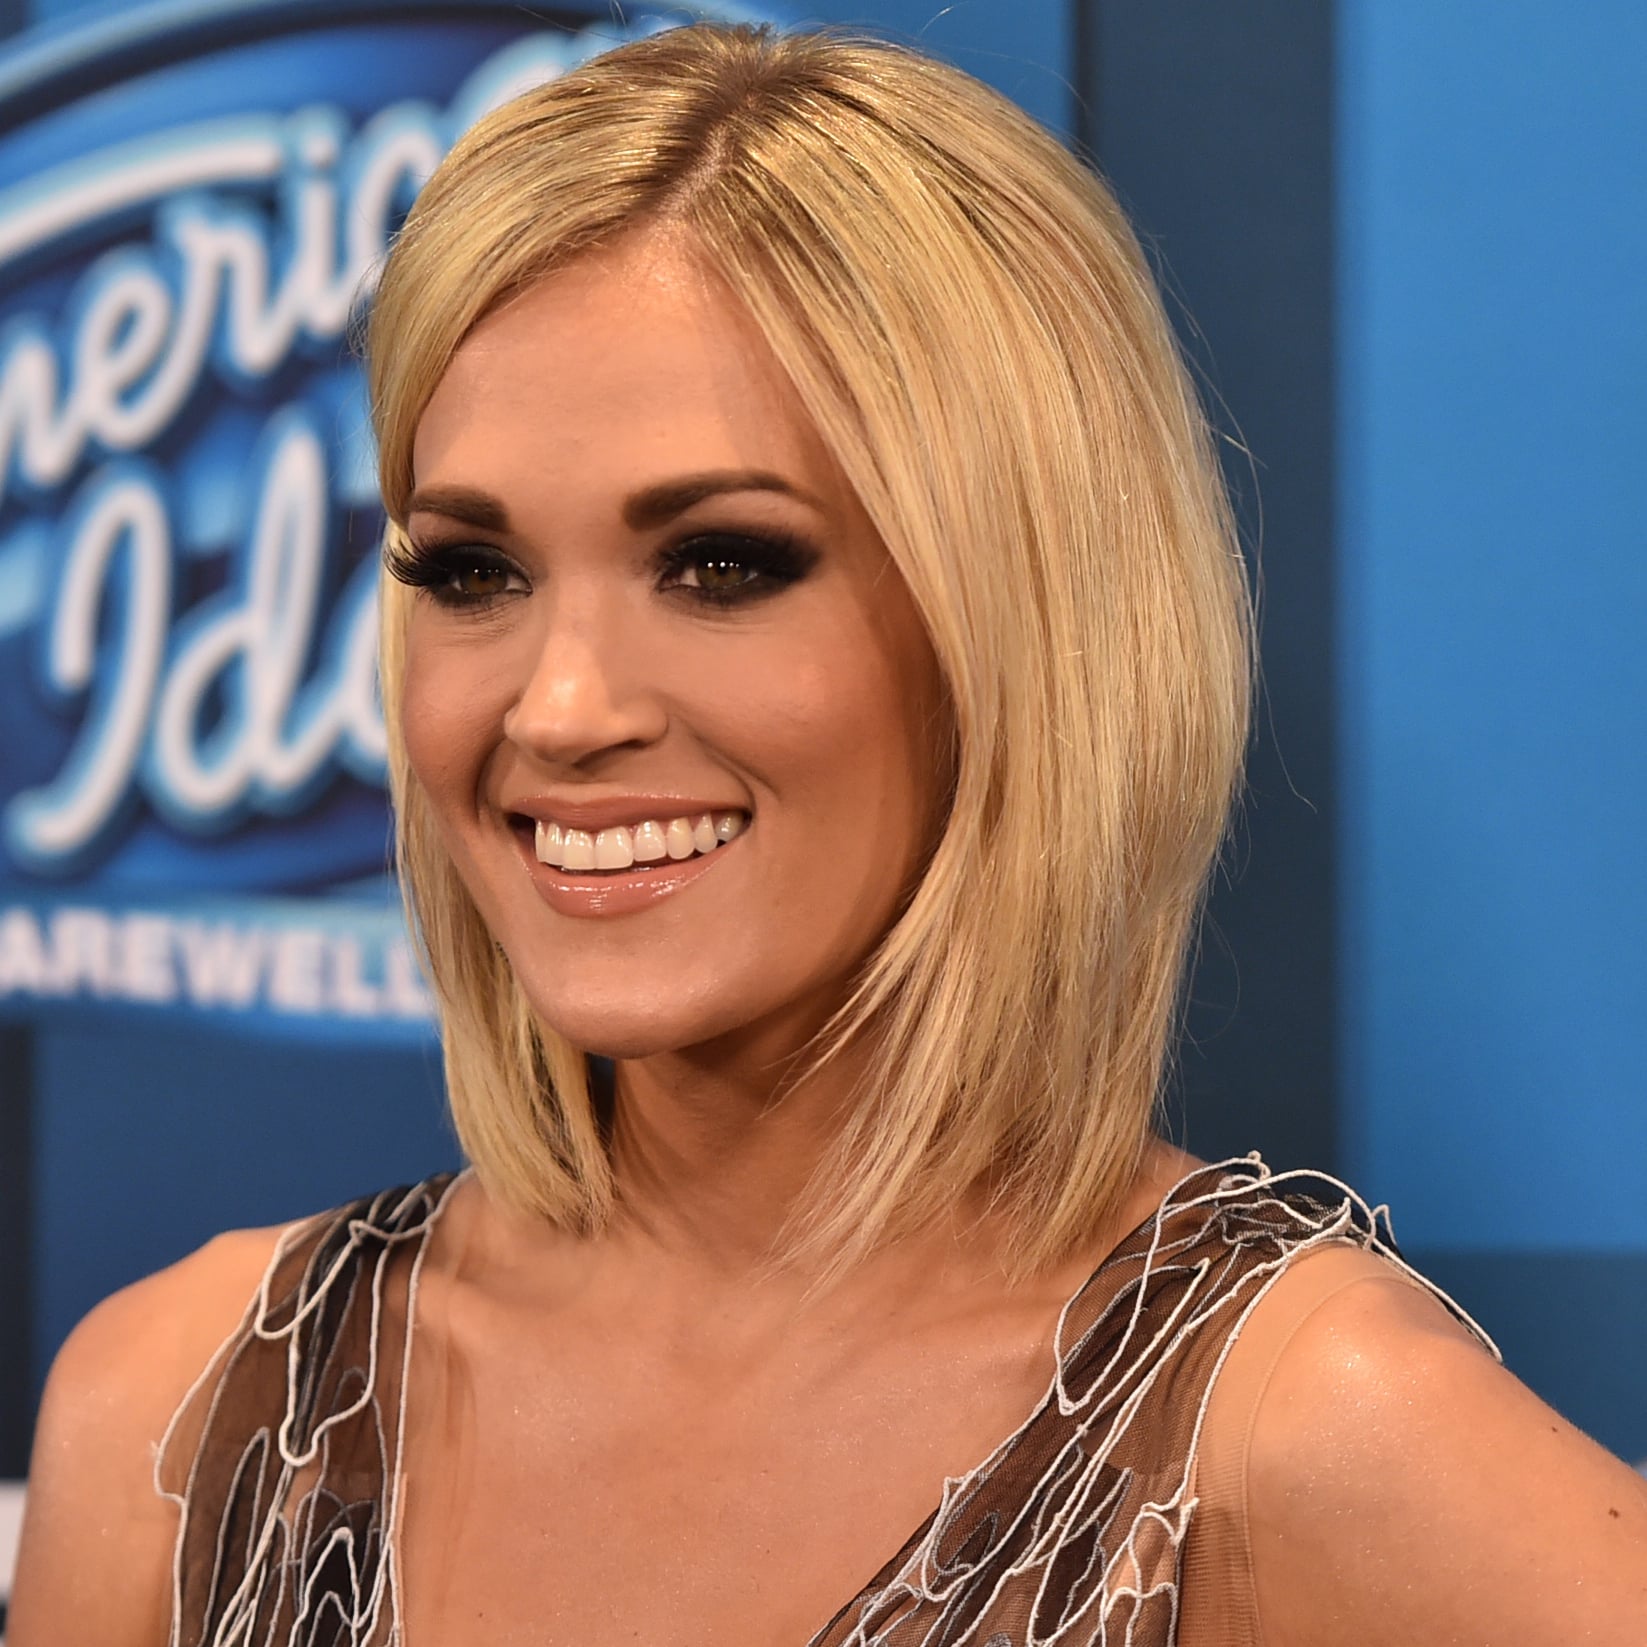 Carrie Underwood At The American Idol Finale 2016 POPSUGAR Celebrity